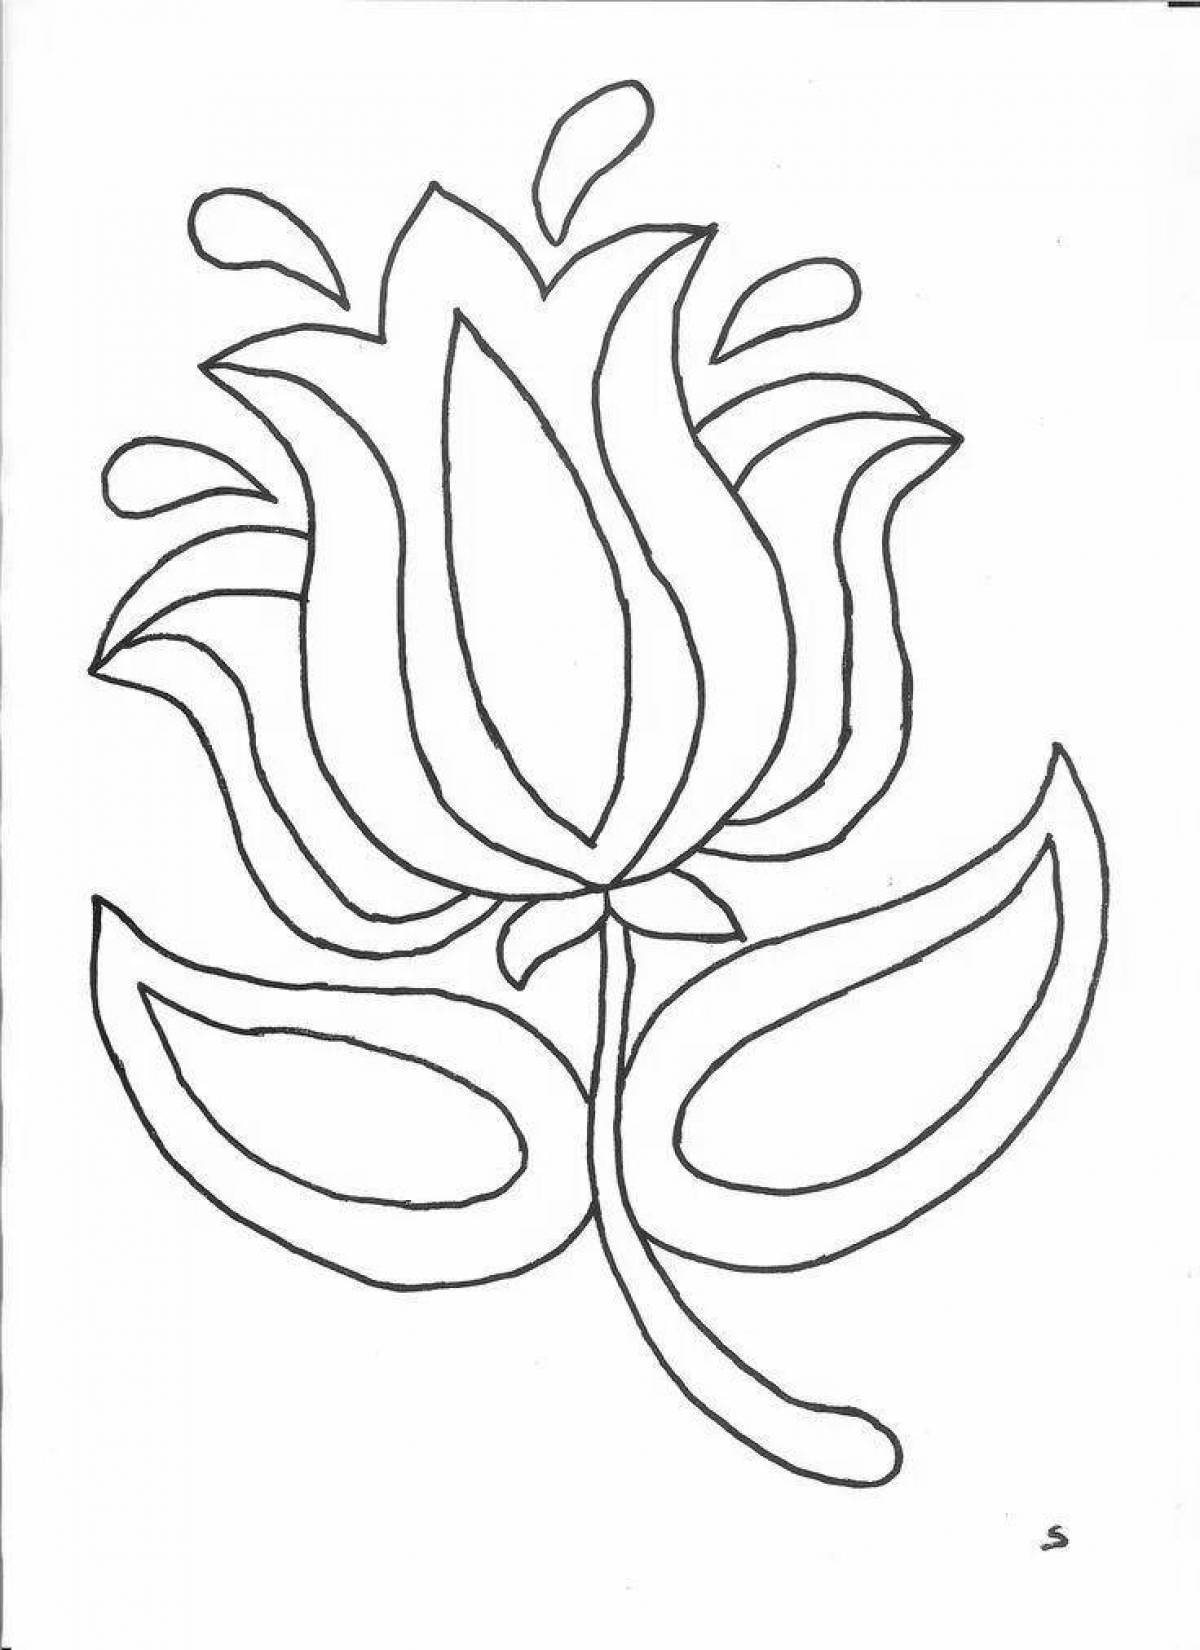 Charming stone flower coloring page